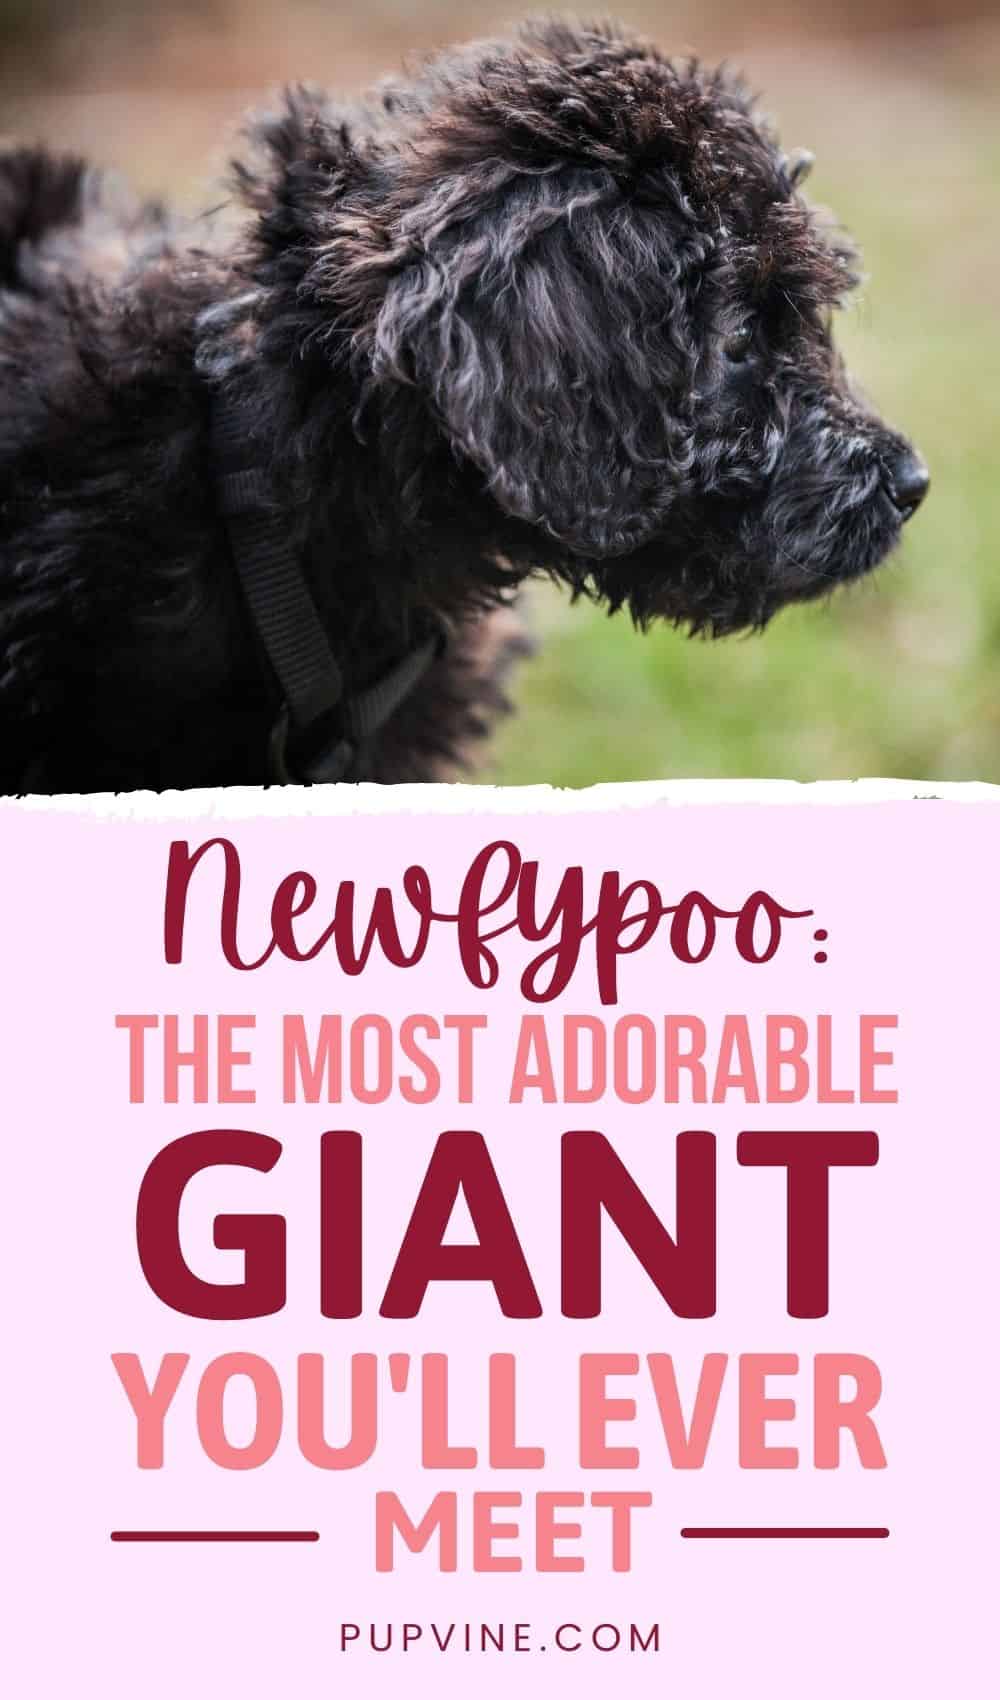 Newfypoo The Most Adorable Giant You'll Ever Meet